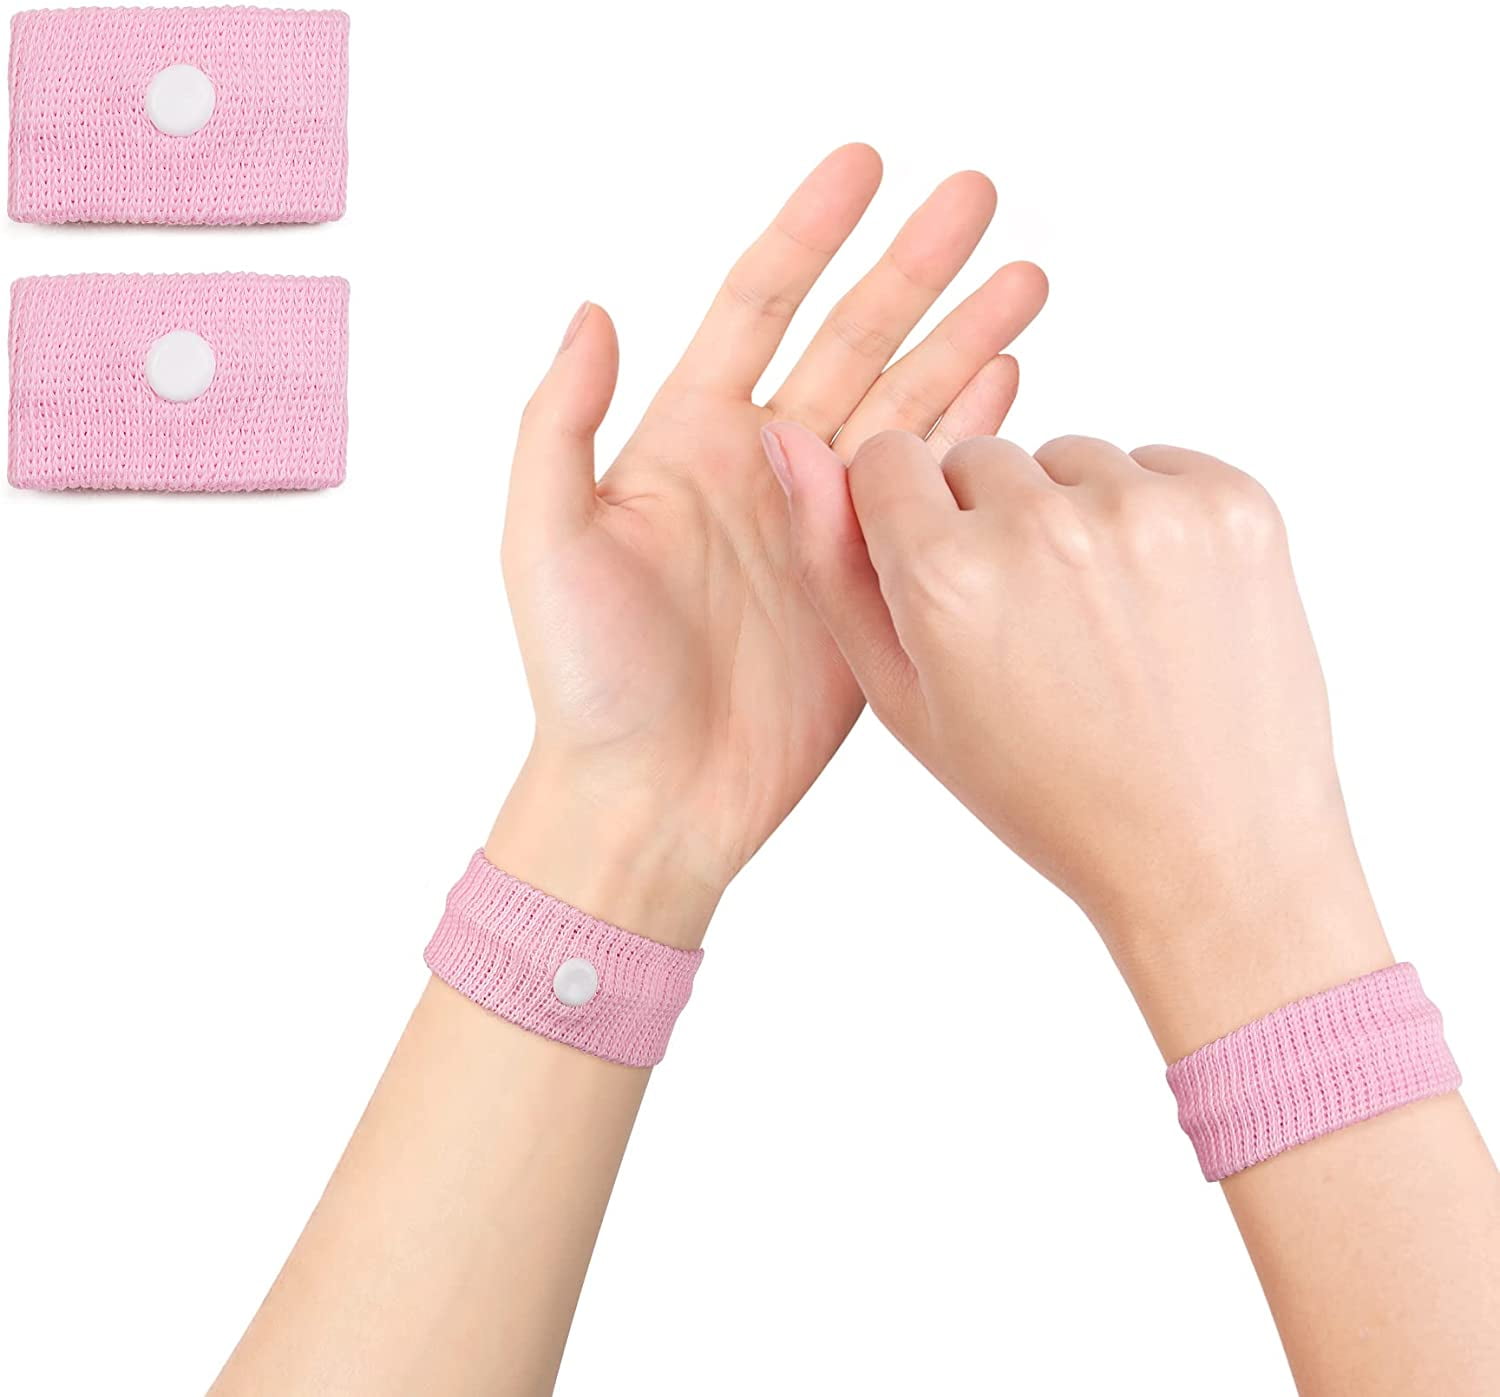 Motion Sickness Wristband, Anti-Nausea Acupressure Wrist Band for Nausea  Relief, Dizziness and Vomiting from Car Boat Flying Travel Sickness (Pink